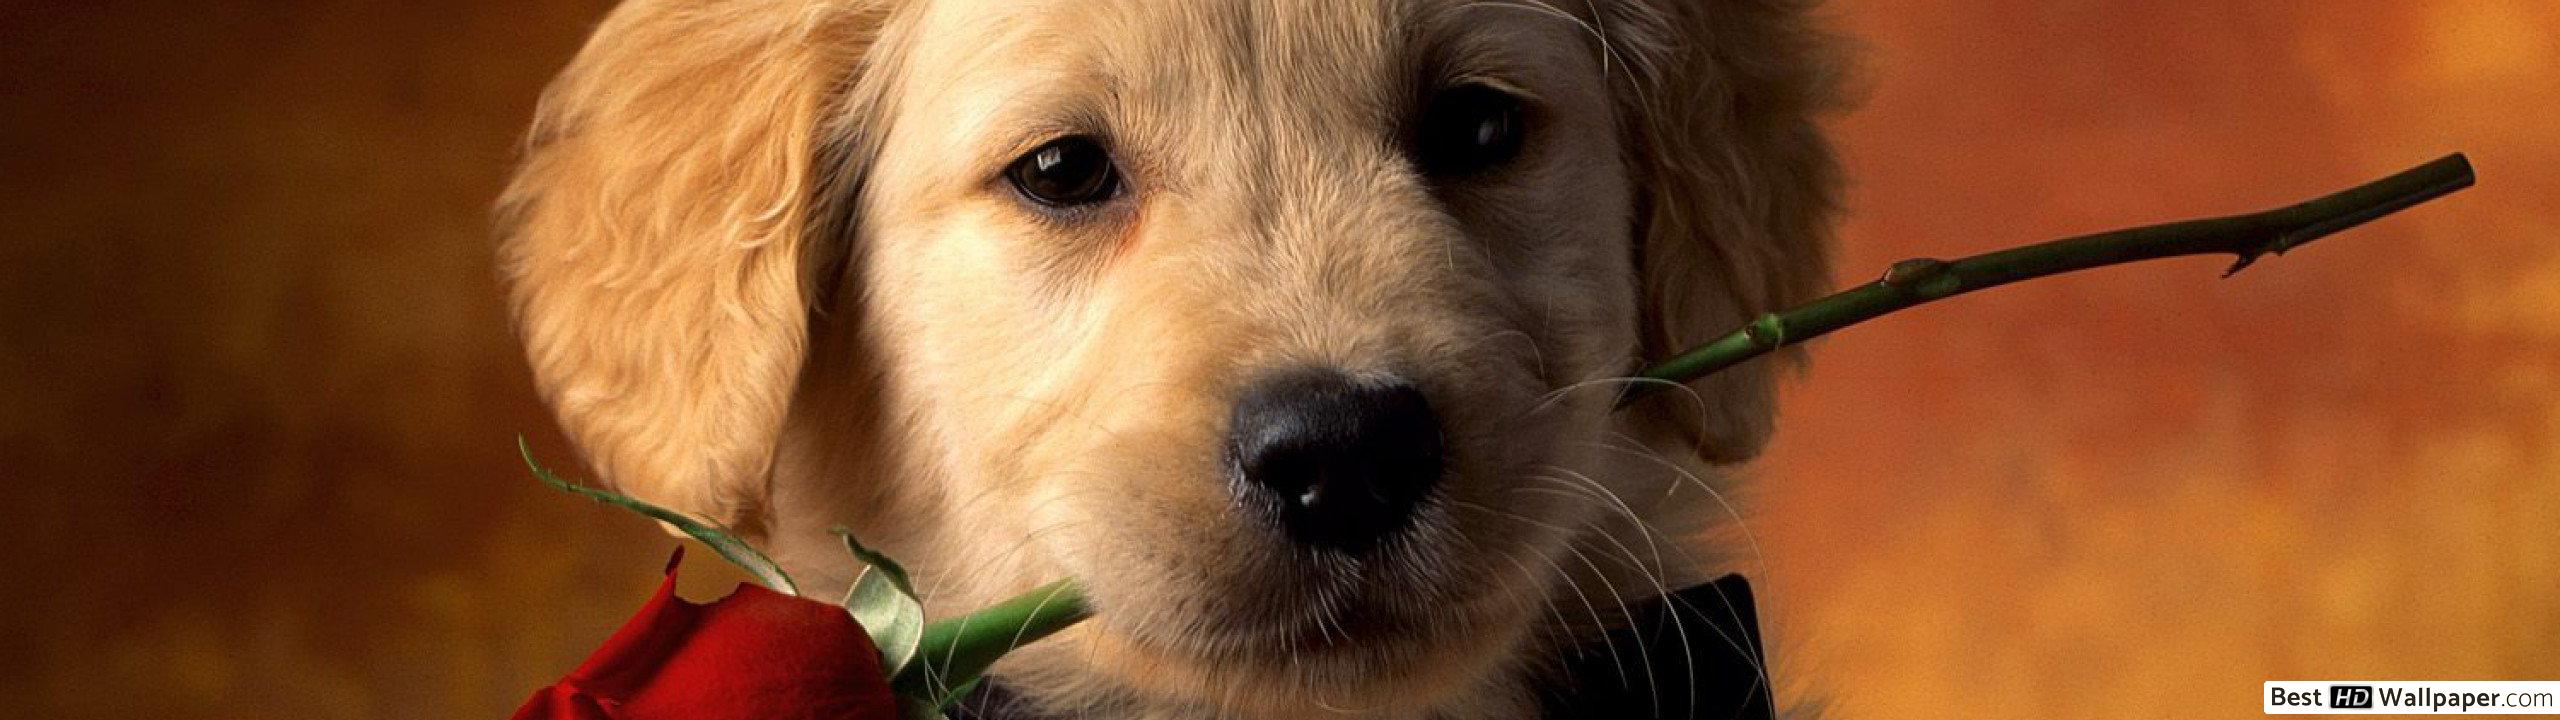 Dog With Rose Gif - HD Wallpaper 